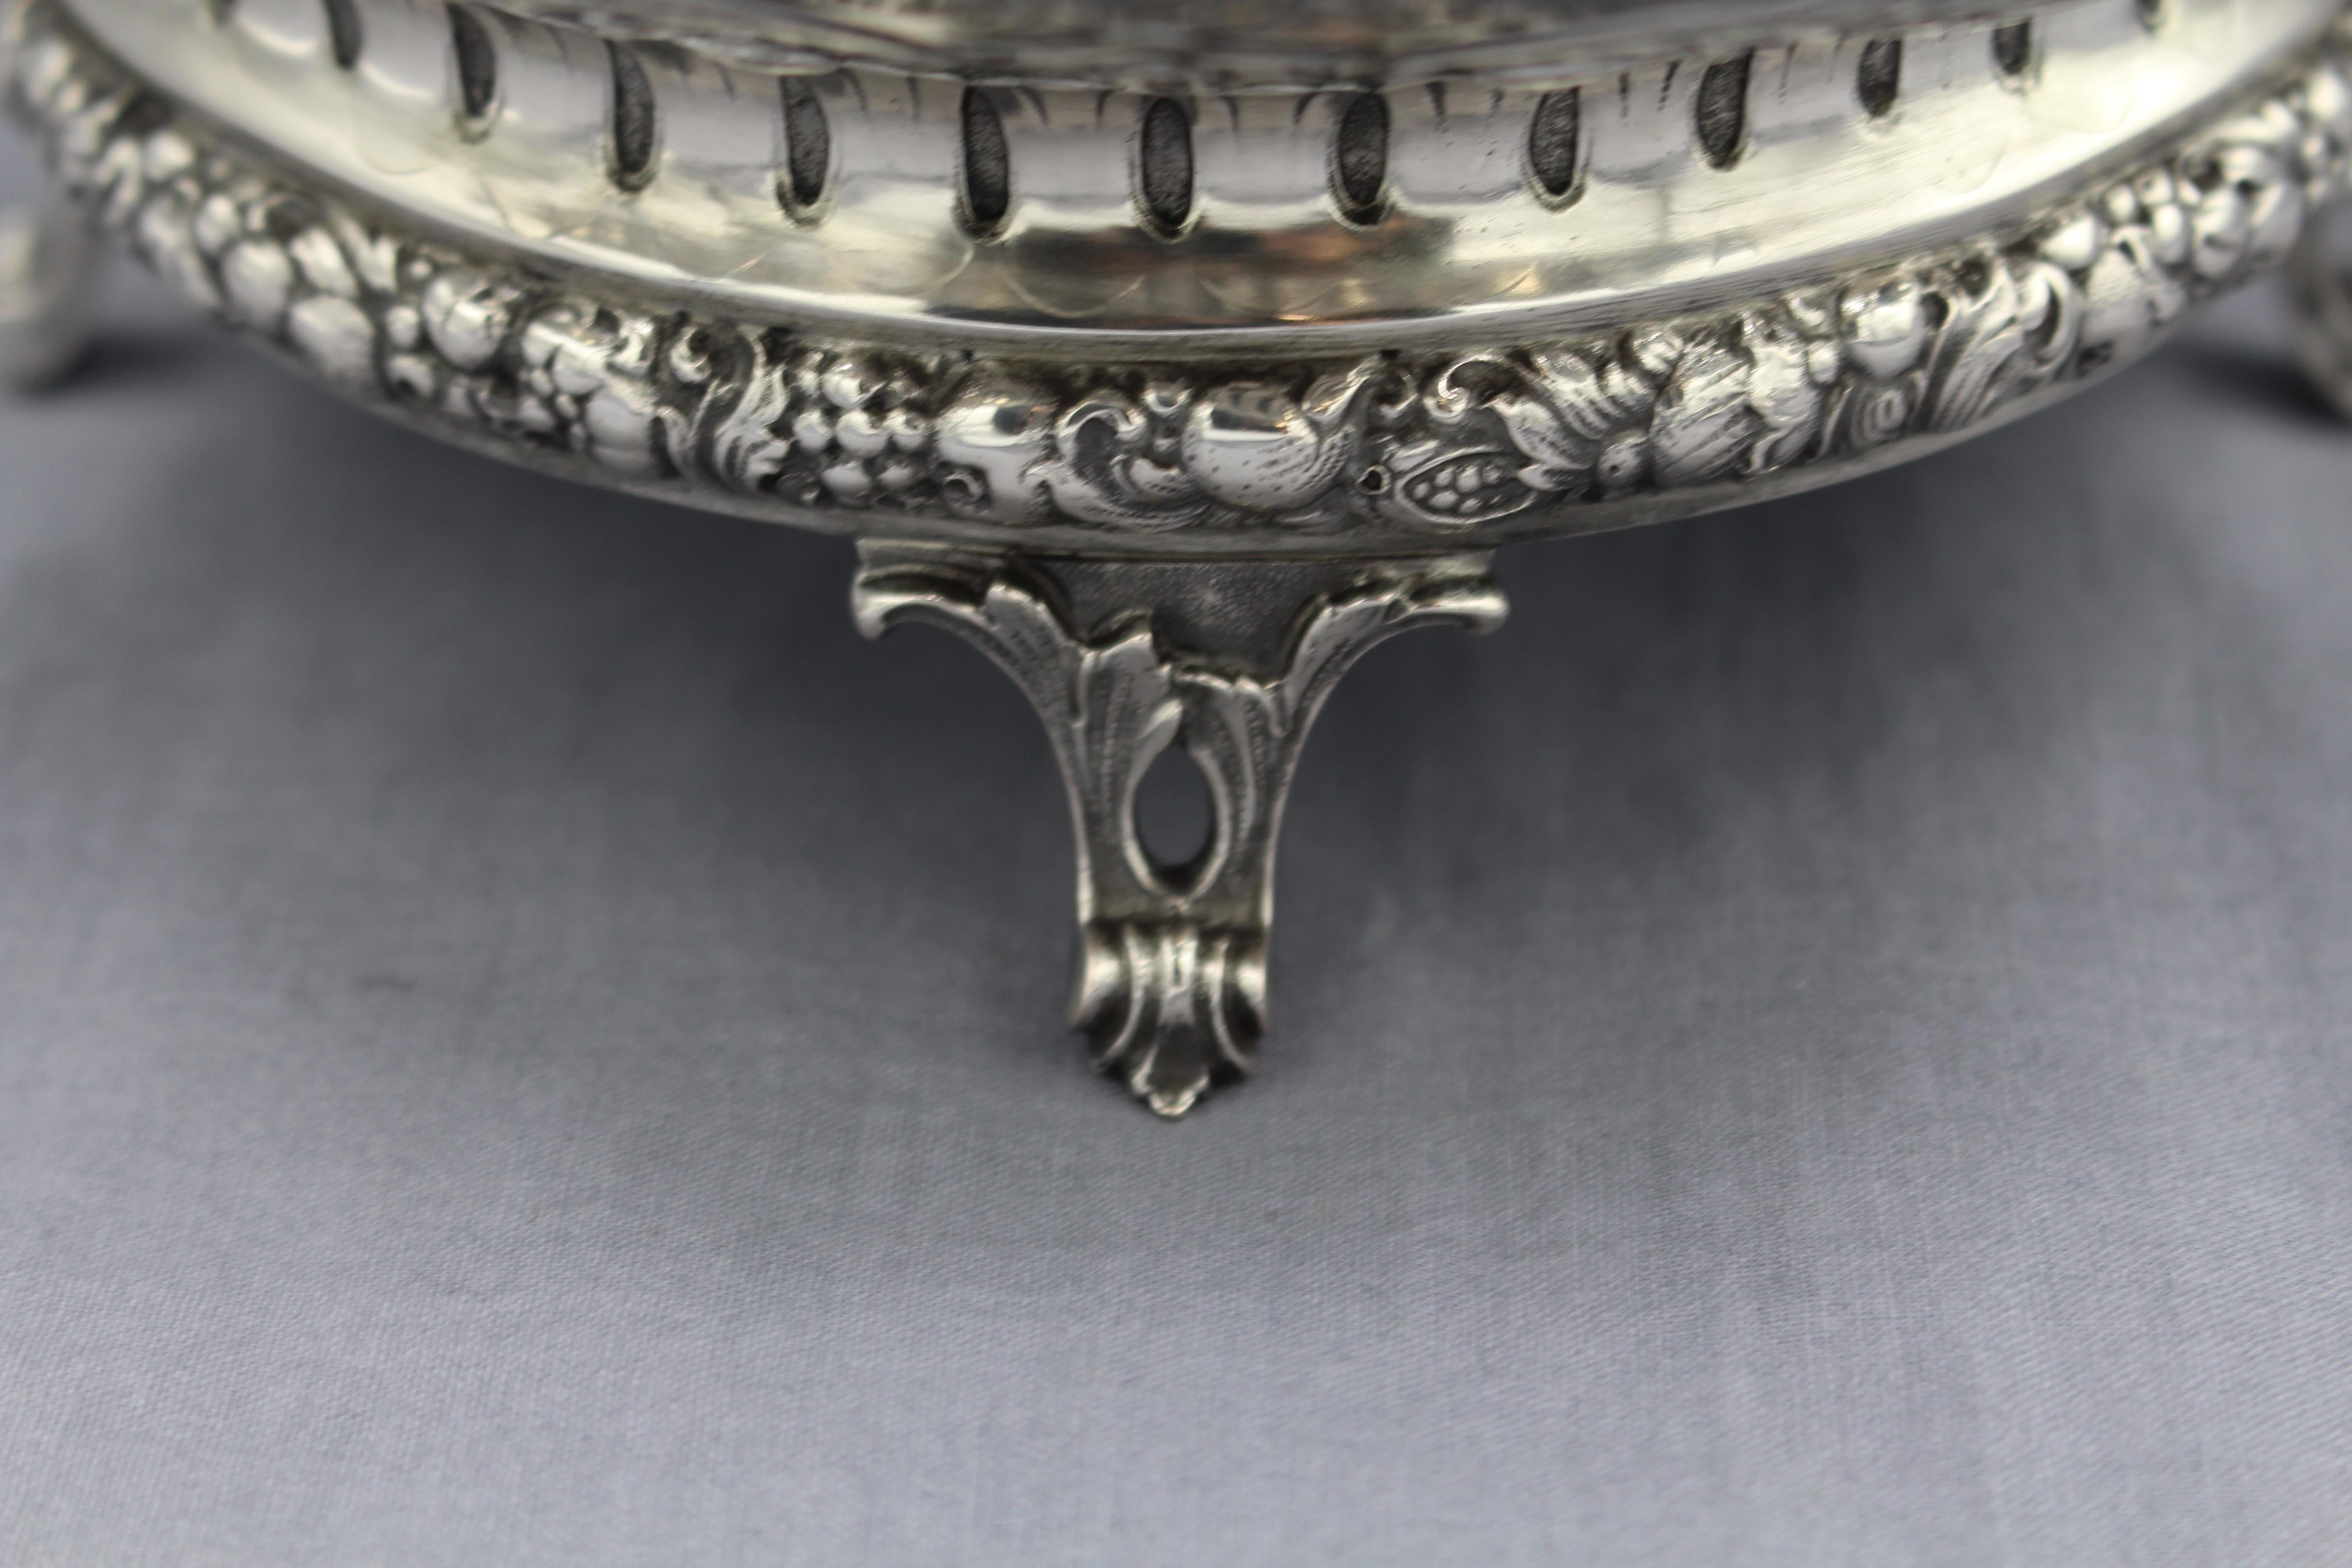 Circa 1880 Storck & Sinsheimer German Silver Fruit Bowl In Good Condition For Sale In Chapel Hill, NC